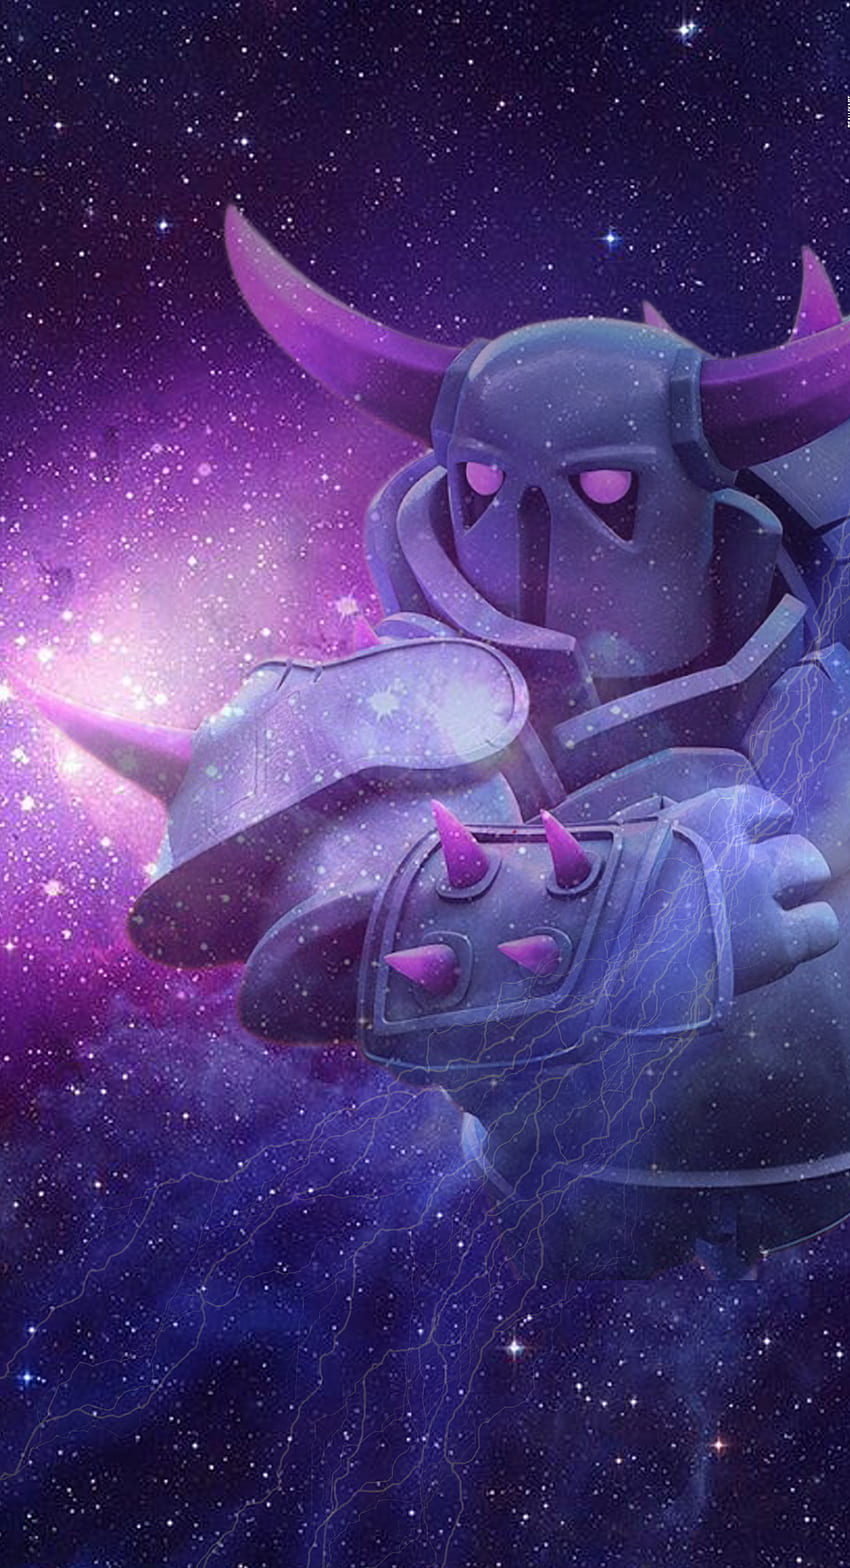 PEKKA by Realuxart (me)! Comment below which you would like to see next!: ClashRoyale, Clash Royale Golem HD phone wallpaper